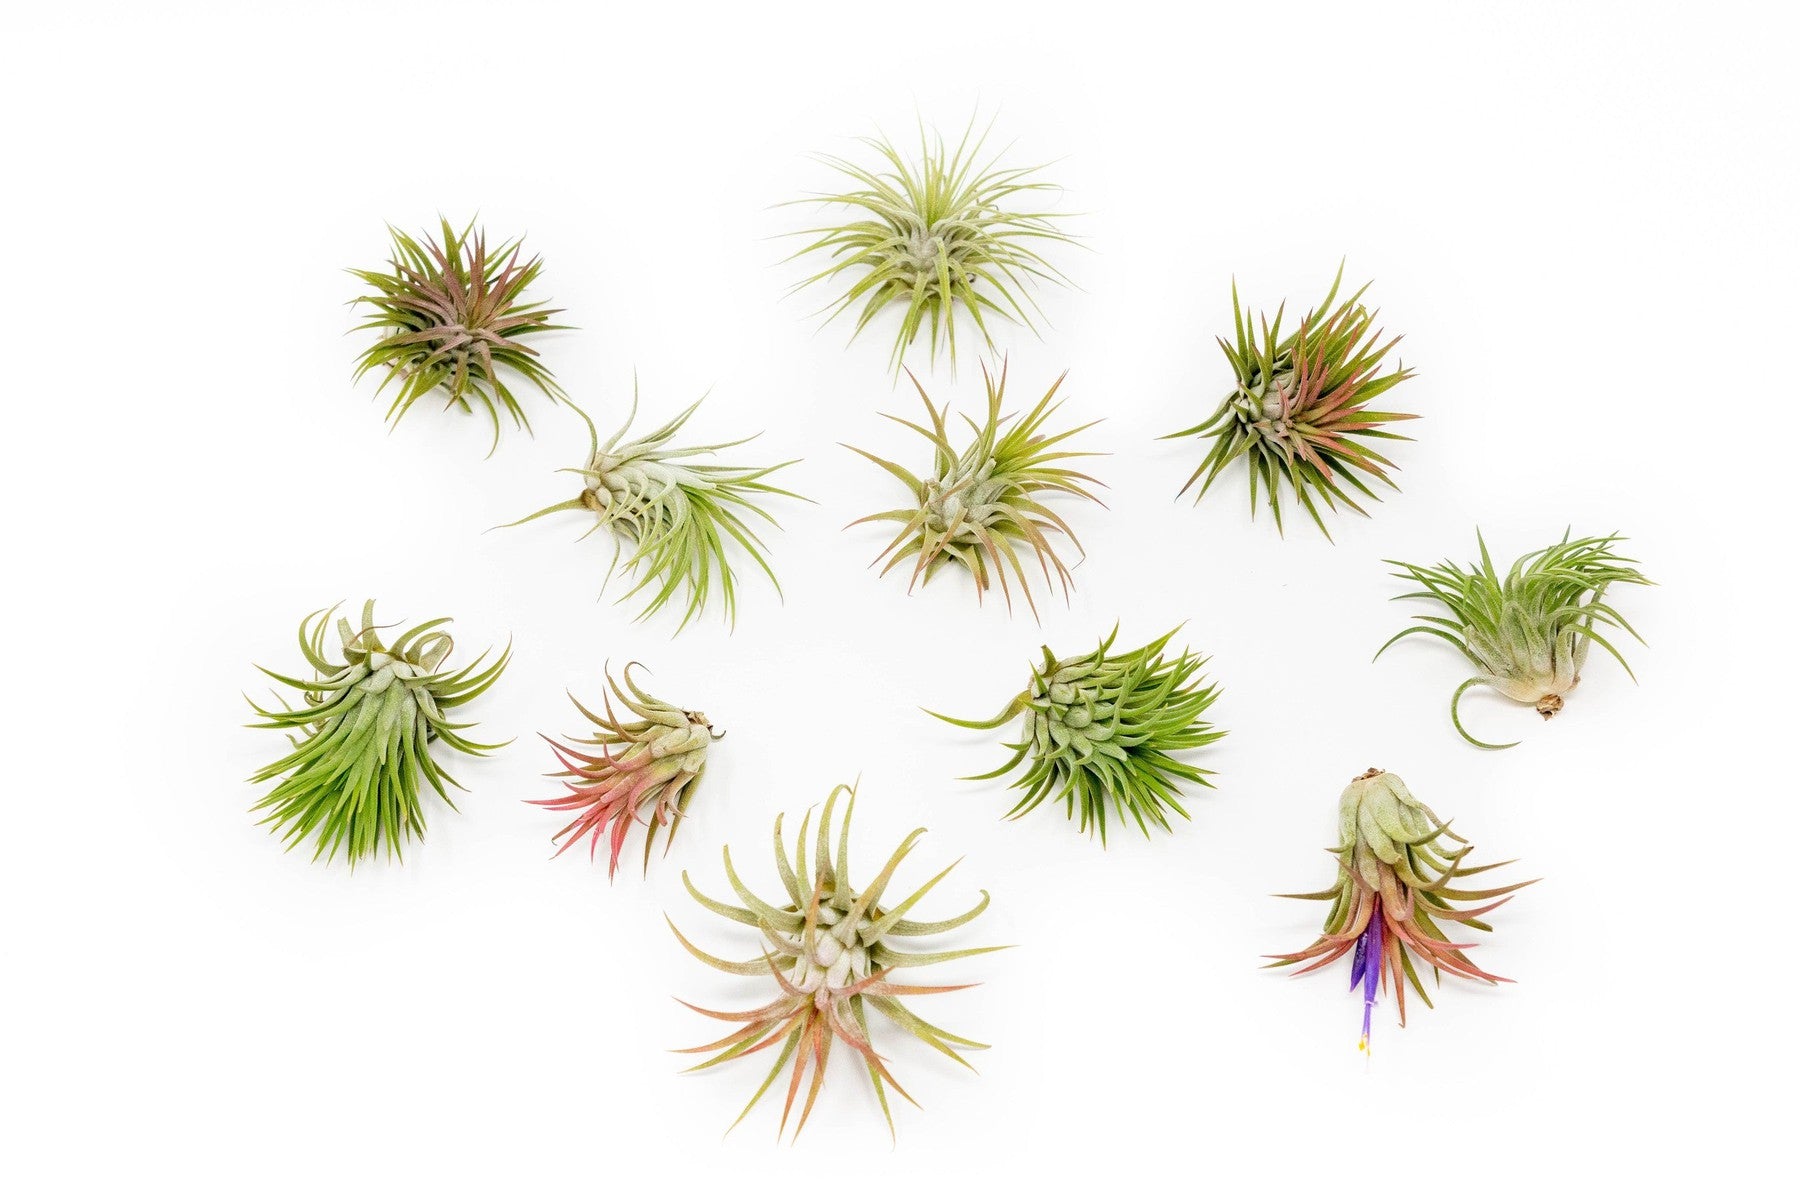 SALE - Large Tillandsia Ionantha Rubra Air Plants - Set of 10 or 20 - 40% Off-airplant-The Succulent Source